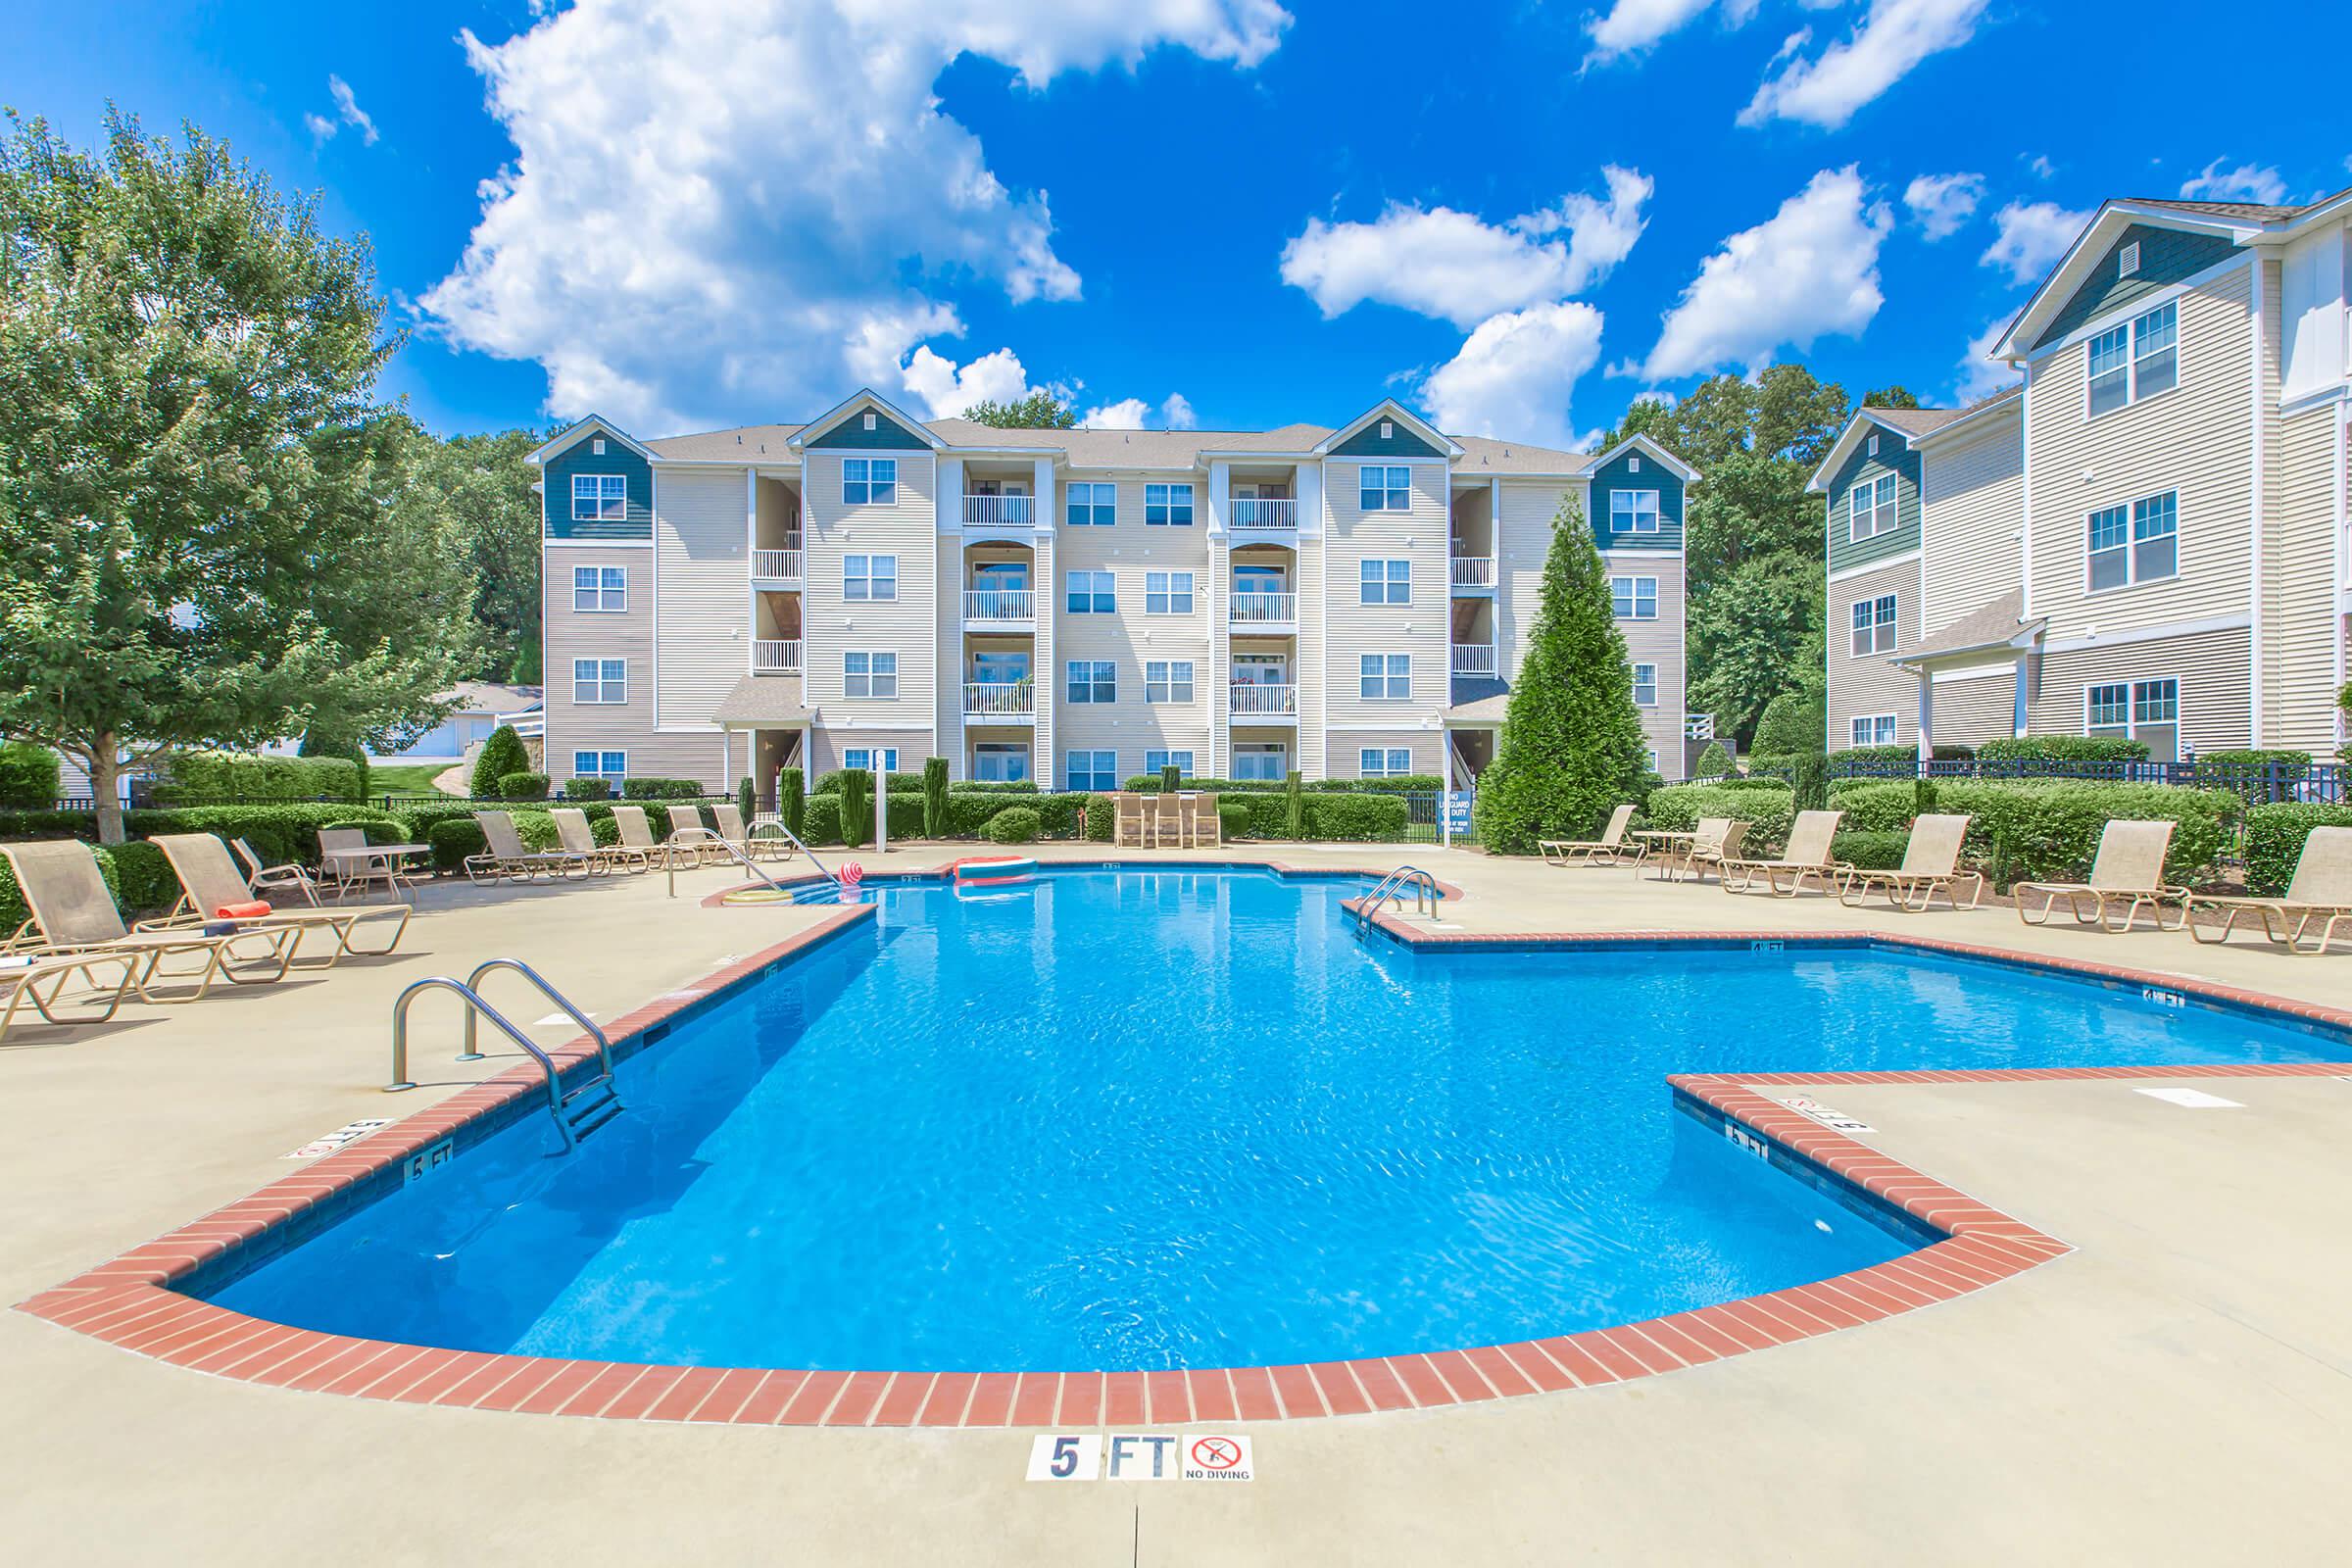 Soak up the rays by the lavish swimming pool at Whisper Creek in Rock Hill, South Carolina.